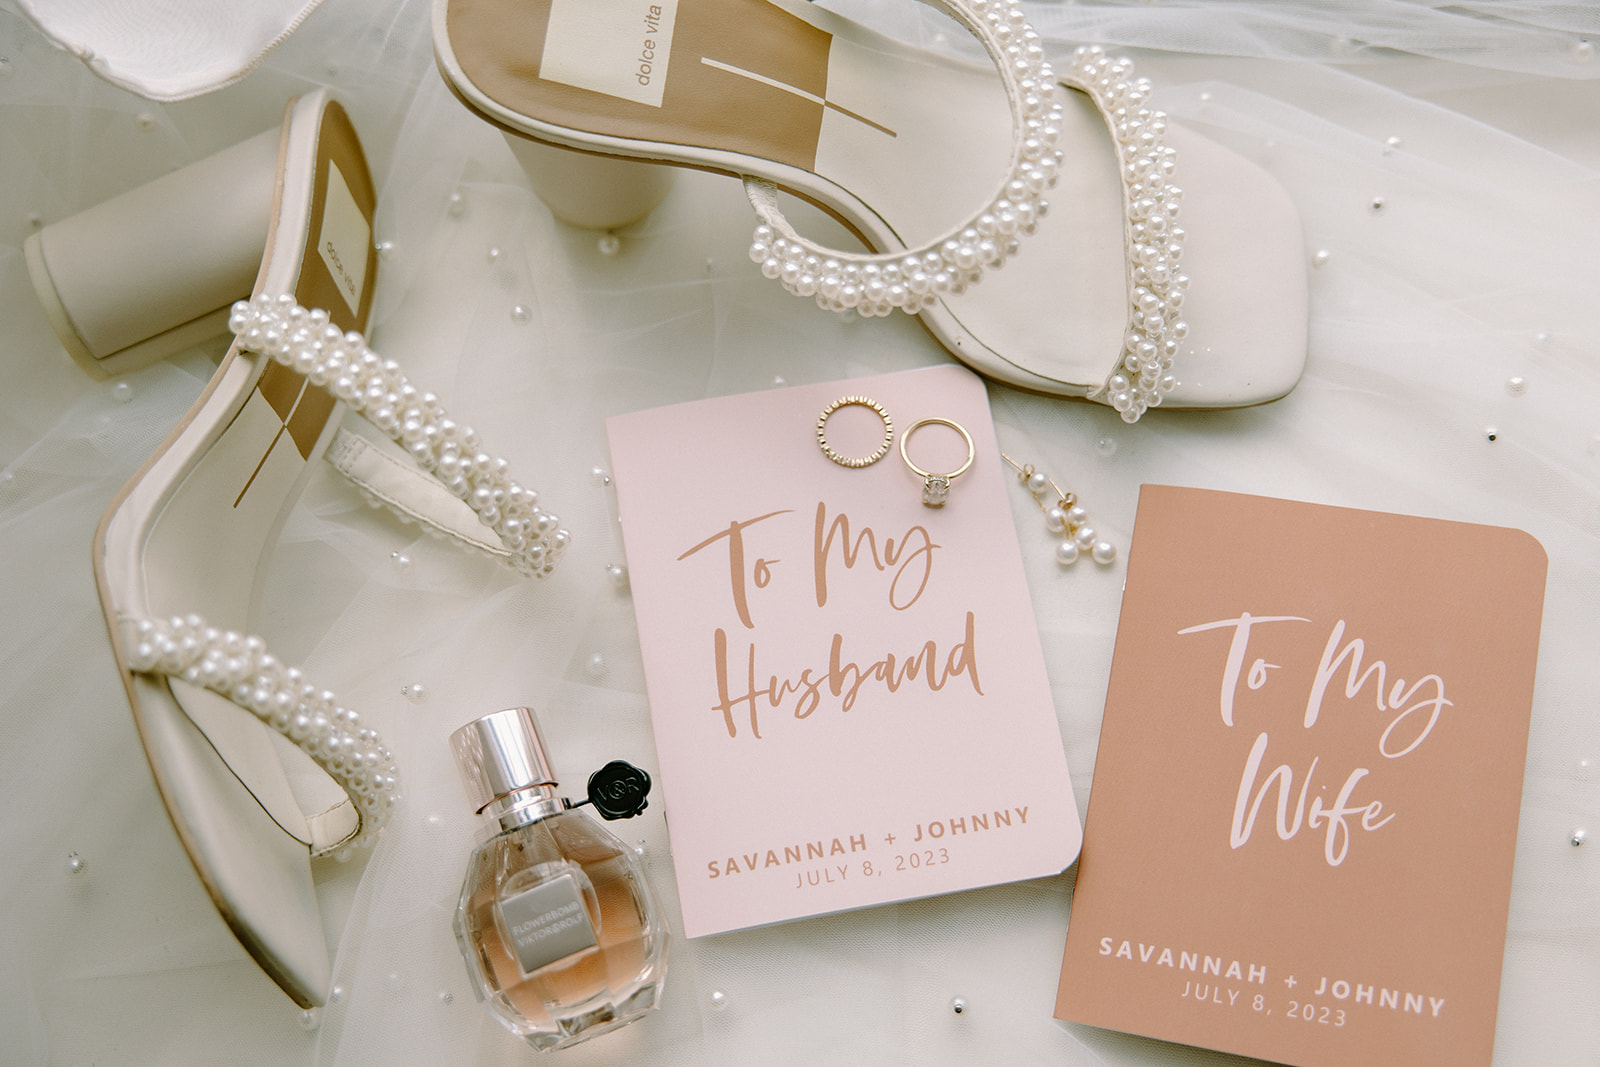 Classy wedding details with pink invitations, pearl shoes and pearl veil.